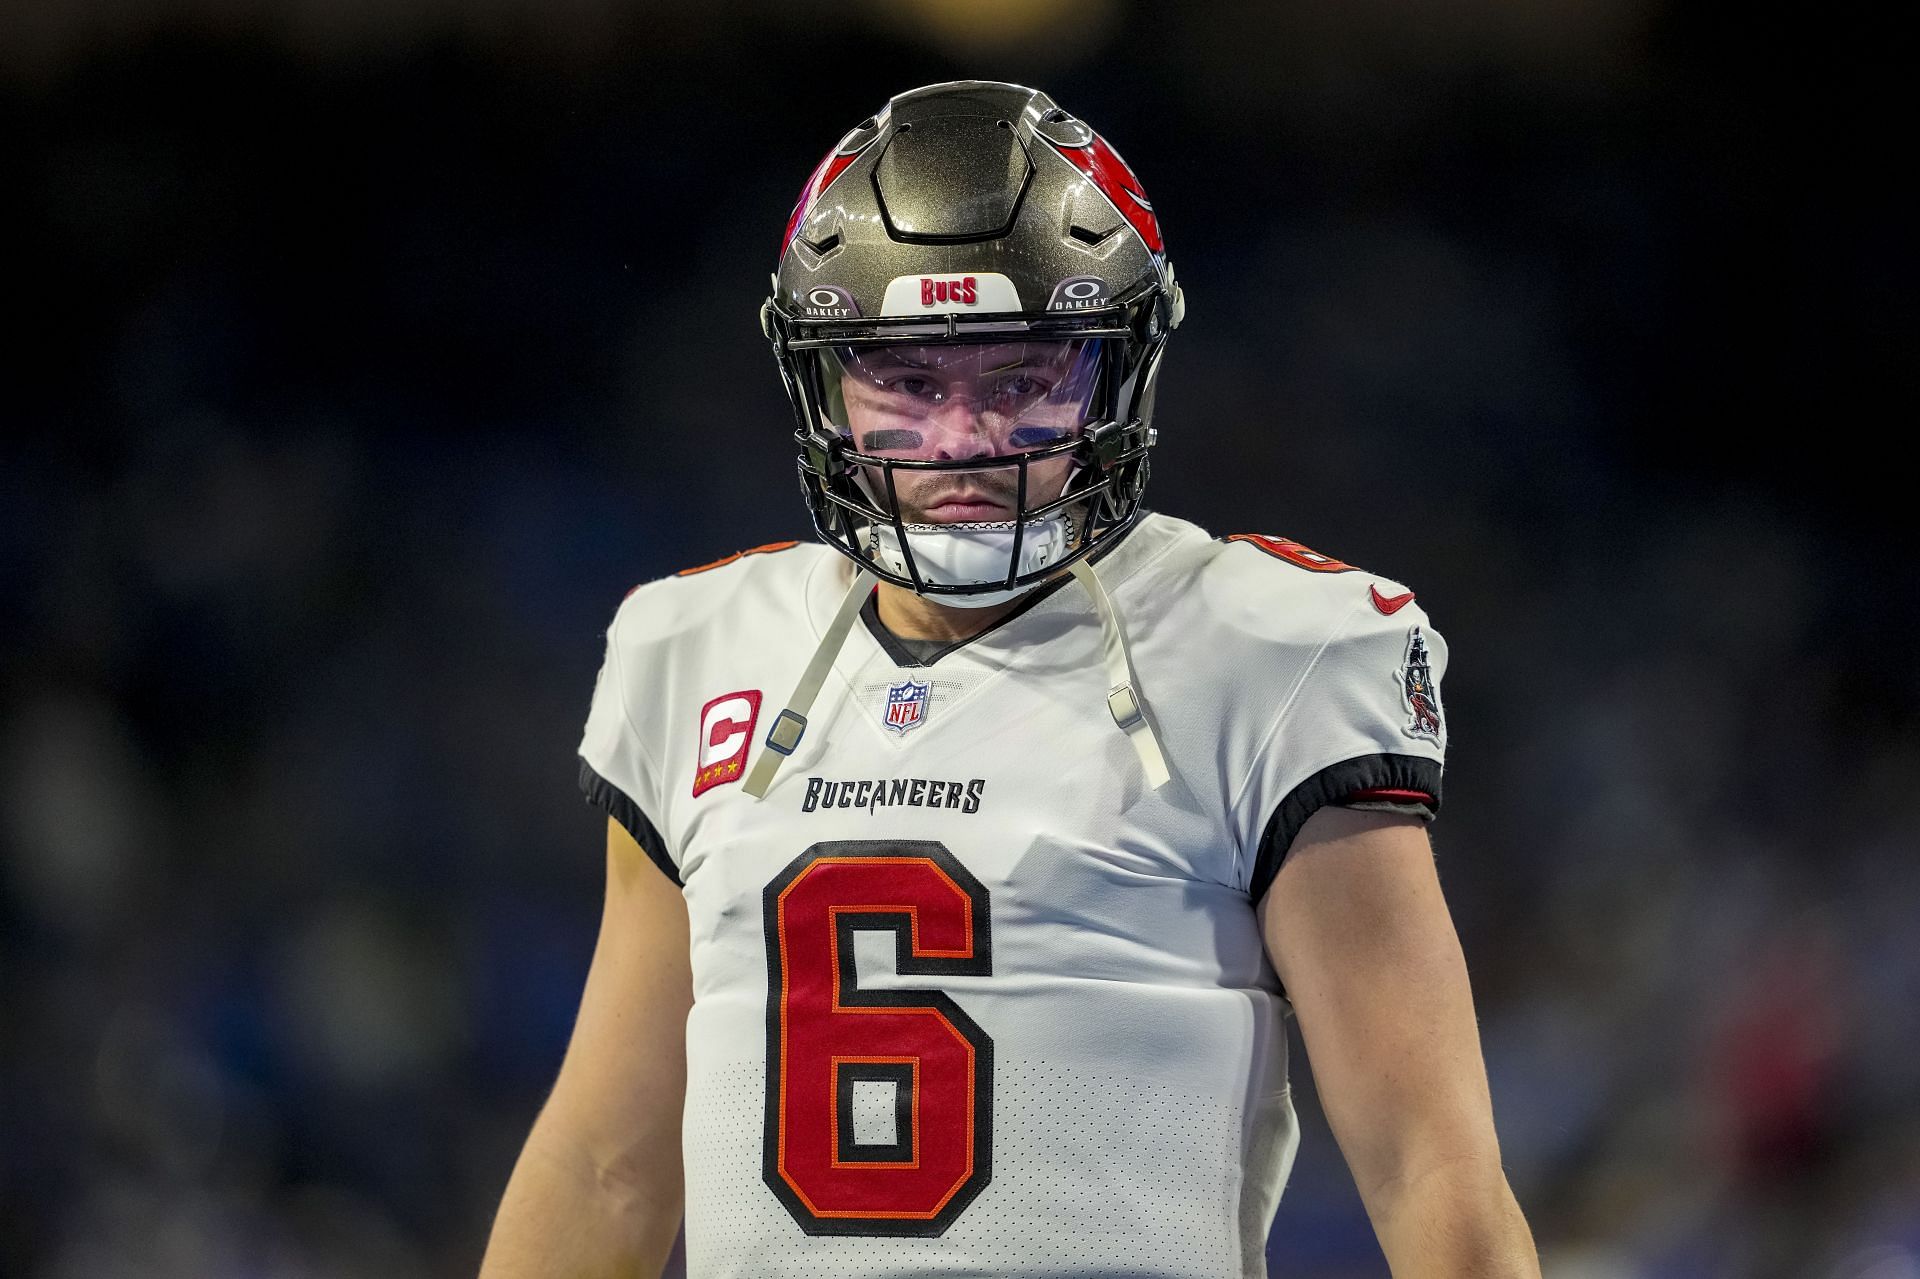 Baker Mayfield: NFC Divisional Playoffs - Tampa Bay Buccaneers v Detroit Lions